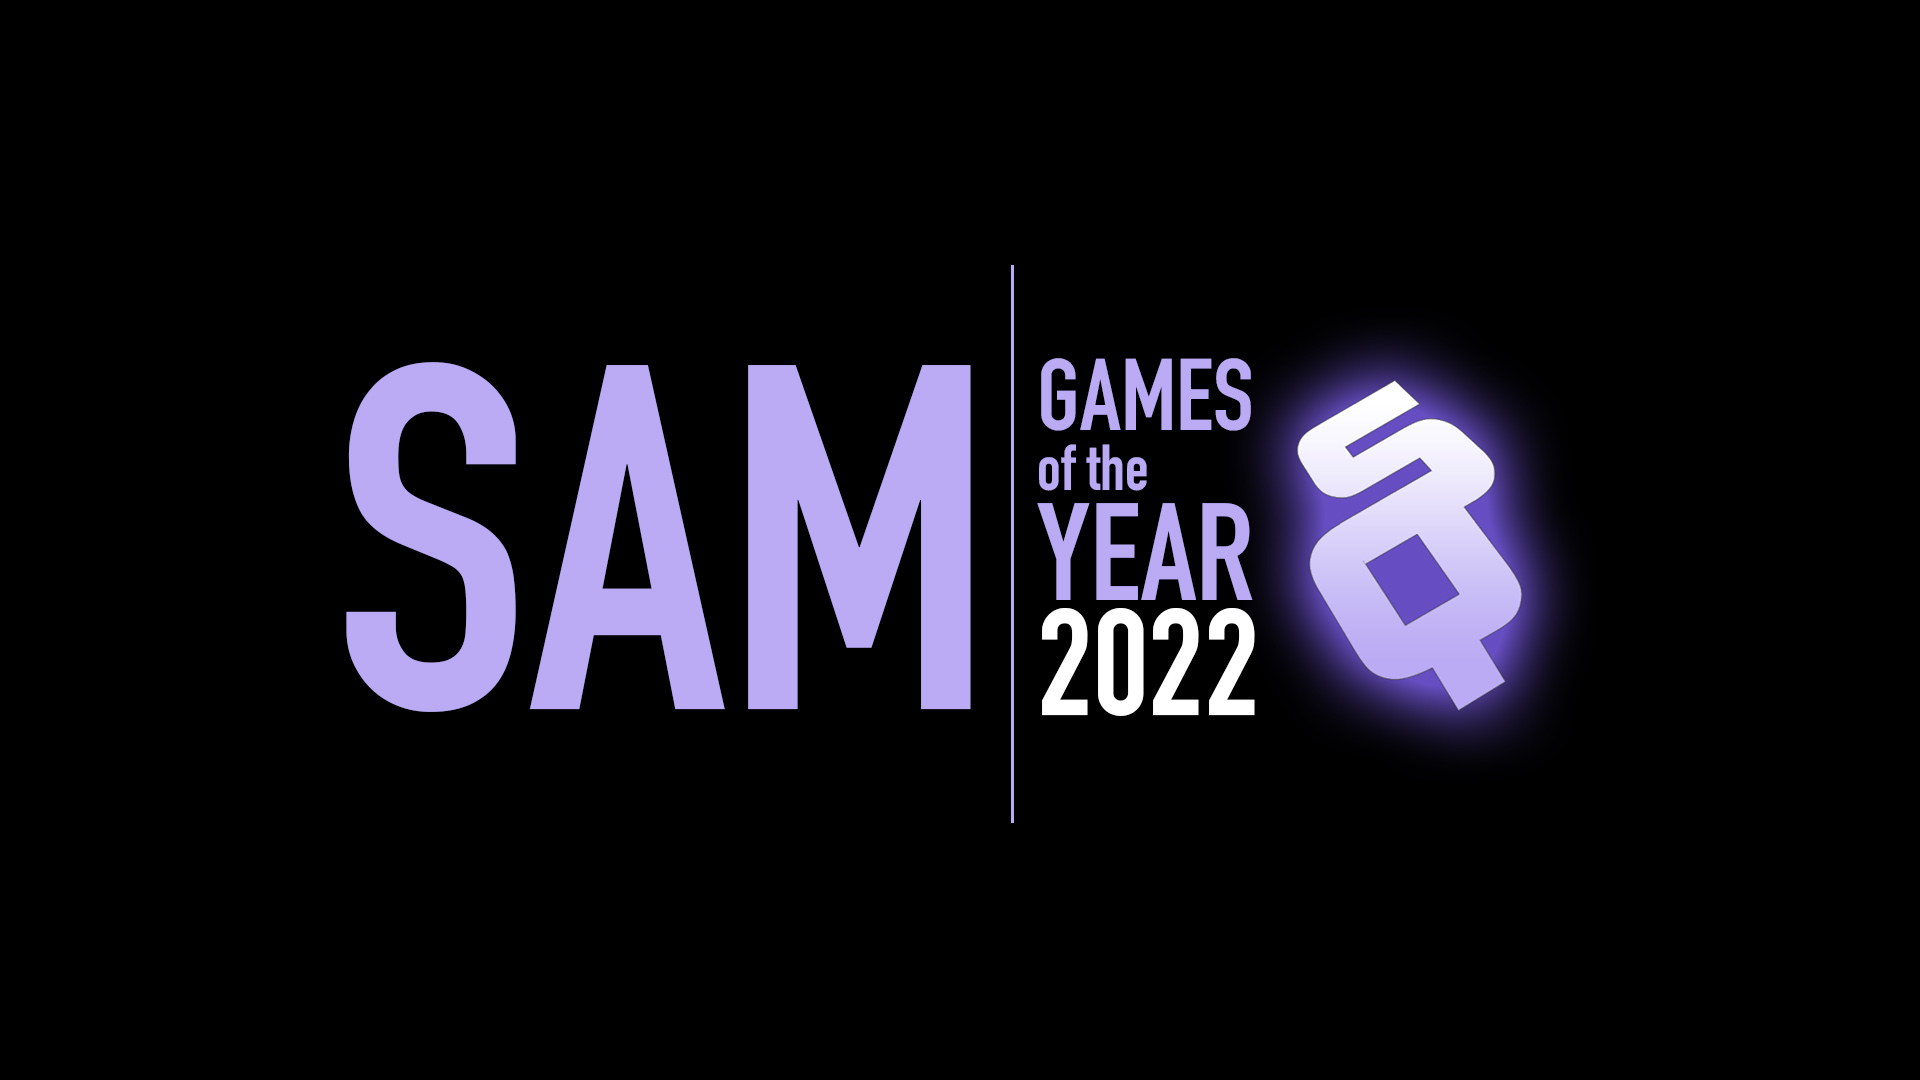 GOTY 2022: Sam’s favorite games of the year